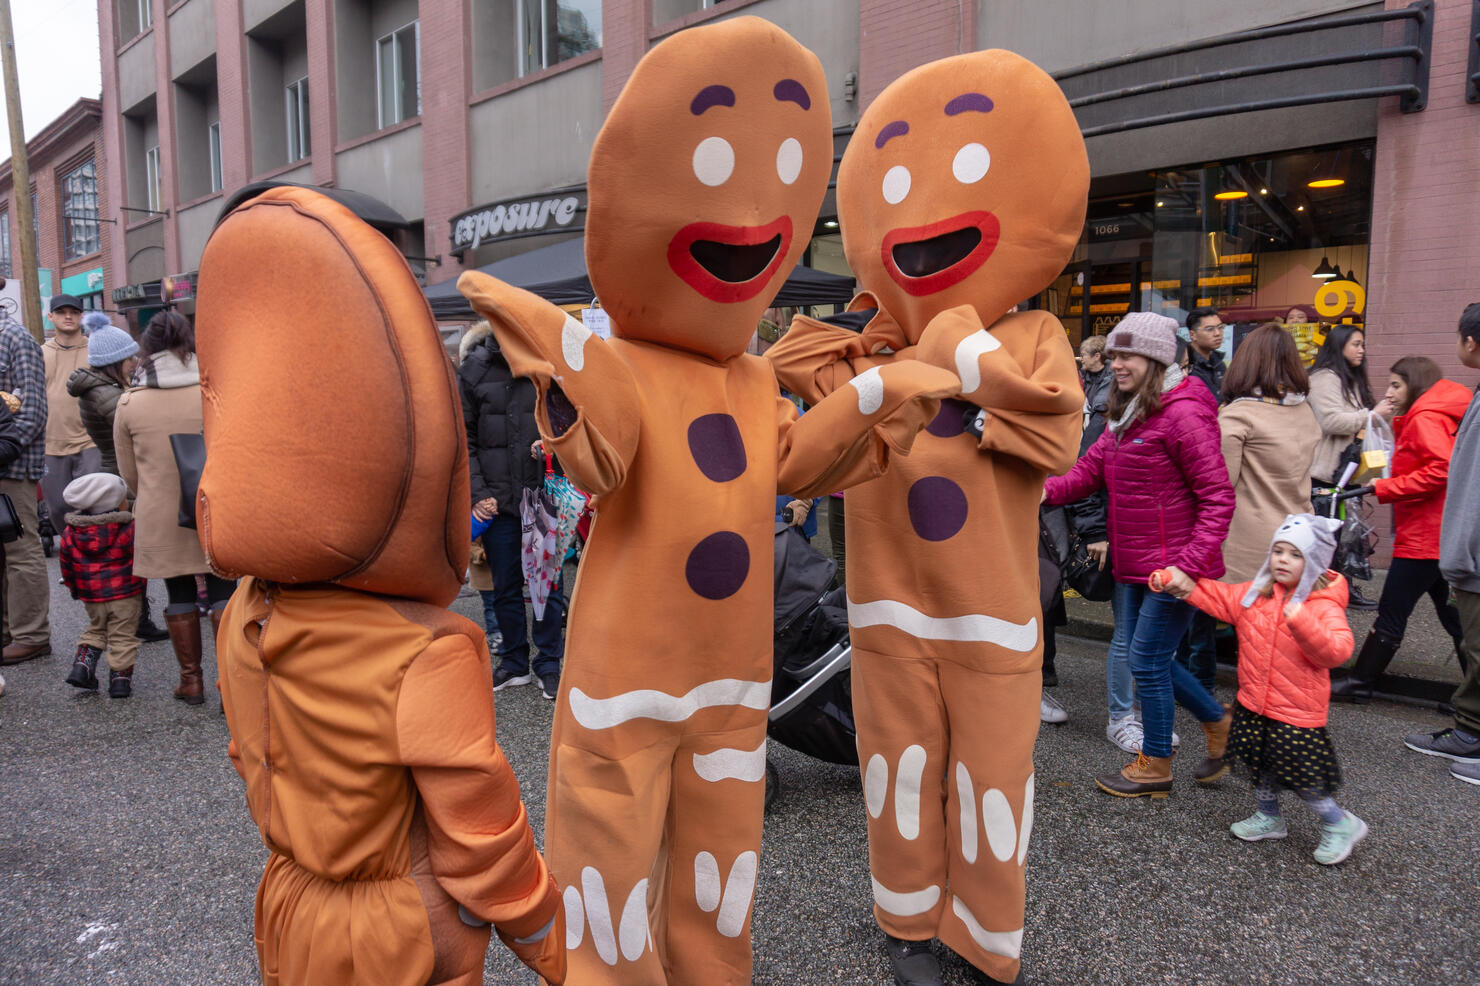 Vancouver, BC, Canada - 11/25/18:  Gingerbread costume people dancing and acting on a city street, during Yaletown CandyTown in Vancouver, B.C., at Christmas time.